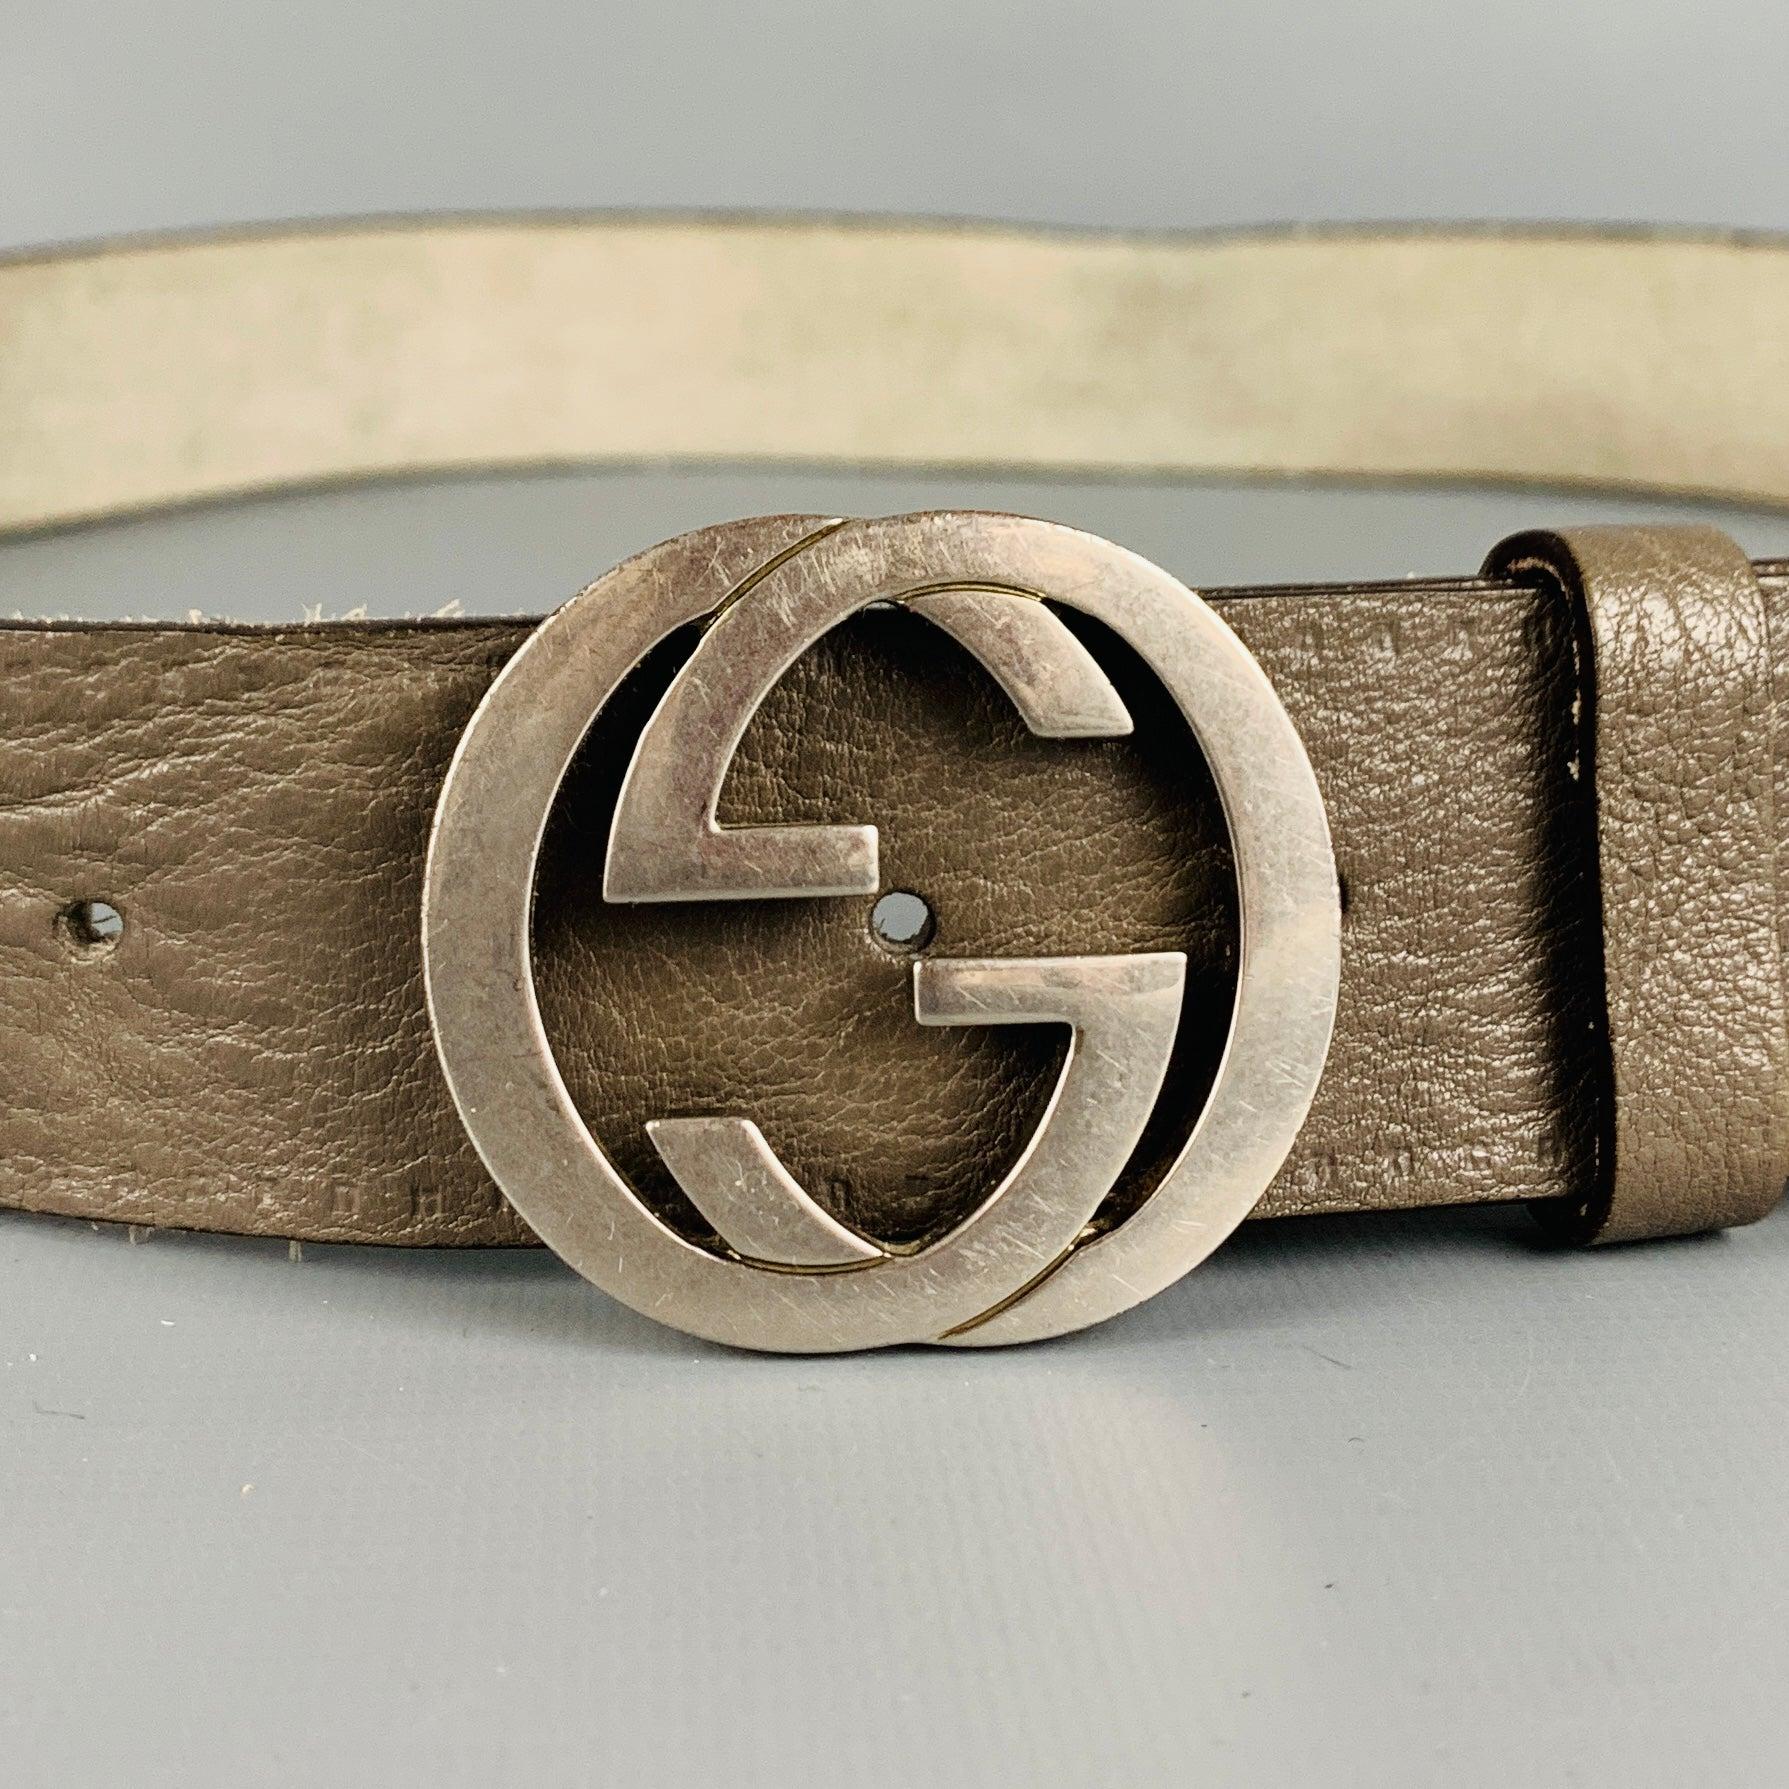 GUCCI belt in a grey leather featuring silver tone interlocking GG monogram buckle. Made in Italy.Very Good Pre-Owned Condition. Signs of wear on buckle
and belt holes. 

Marked:   size not marked.Length: 43 inches Width: 1.5 inches Fits: 36.5